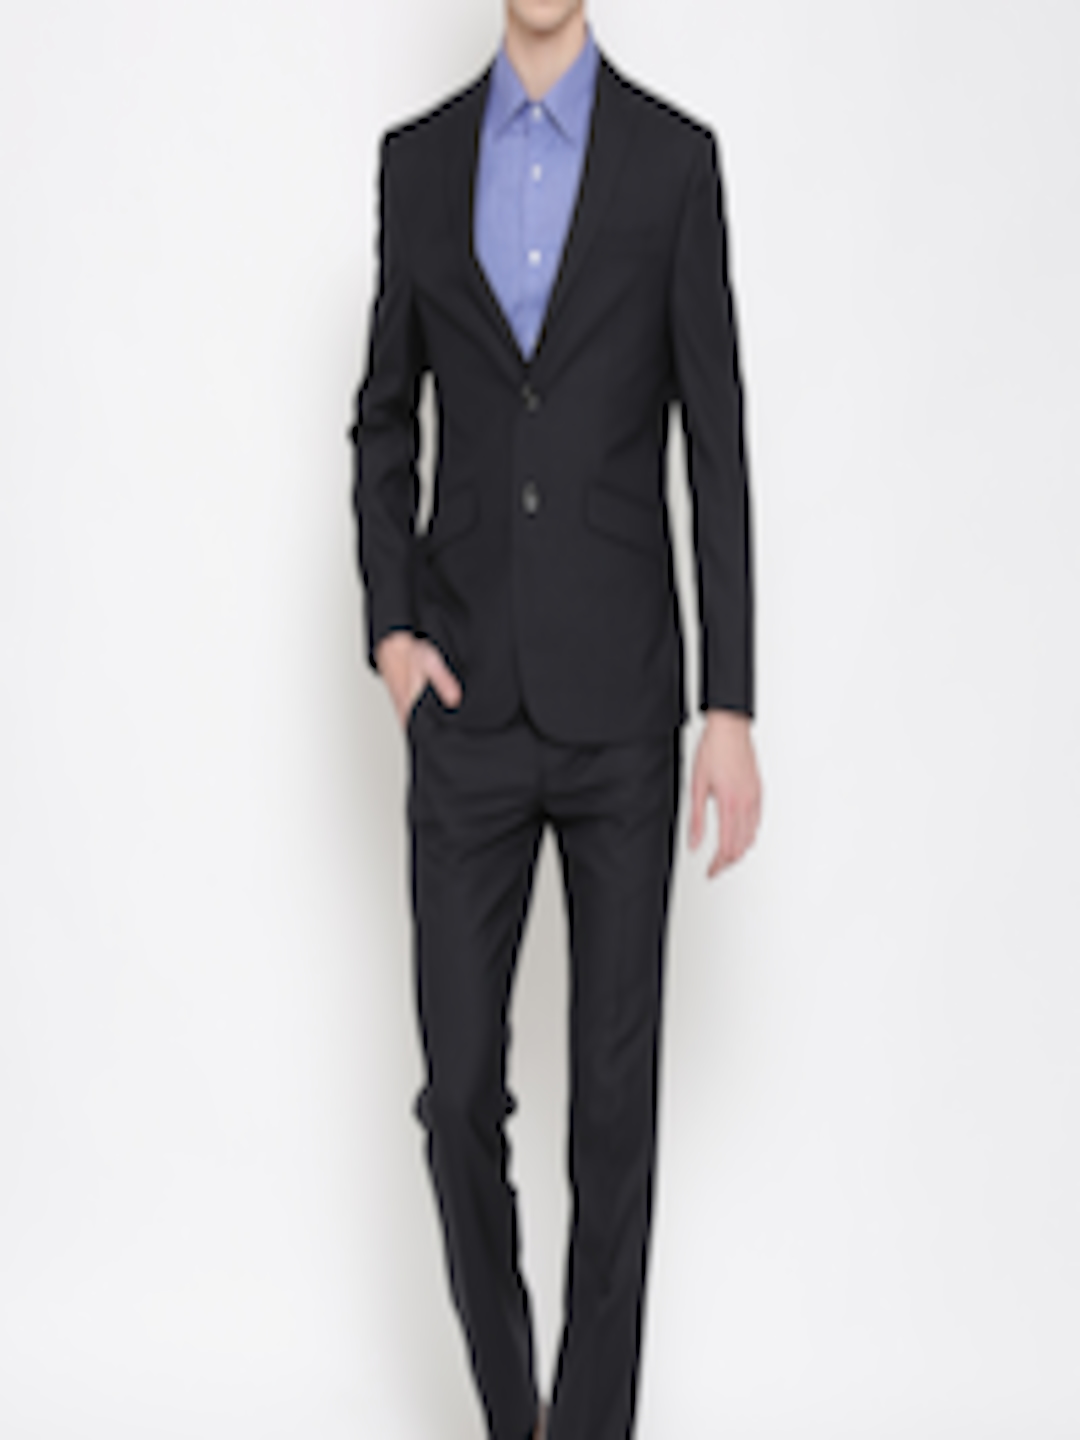 Formal Suits - Buy Latest Formal Suits Online in India